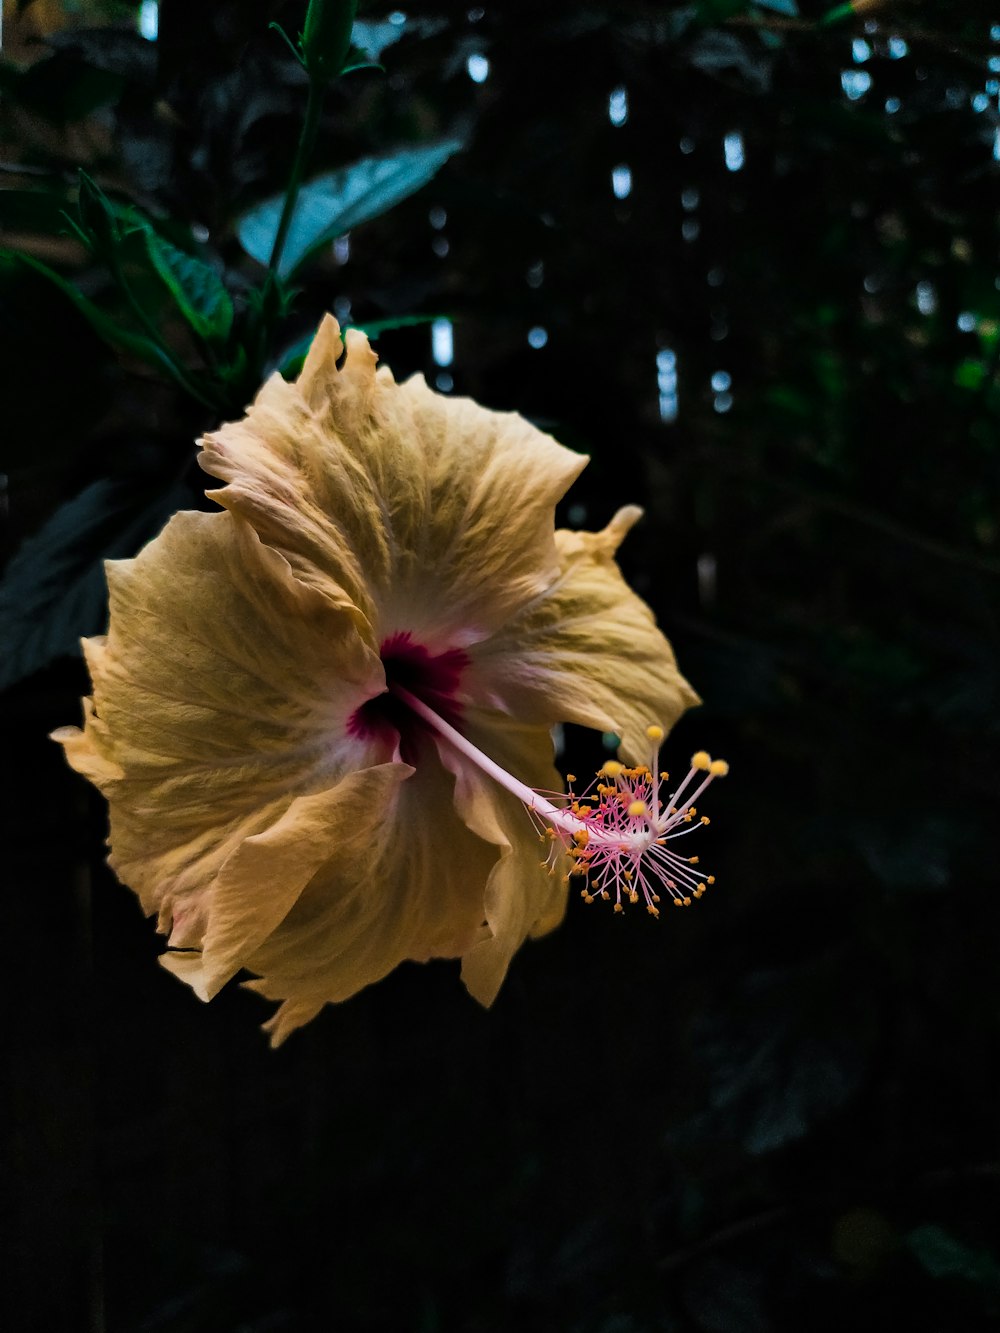 a large yellow flower with a red center